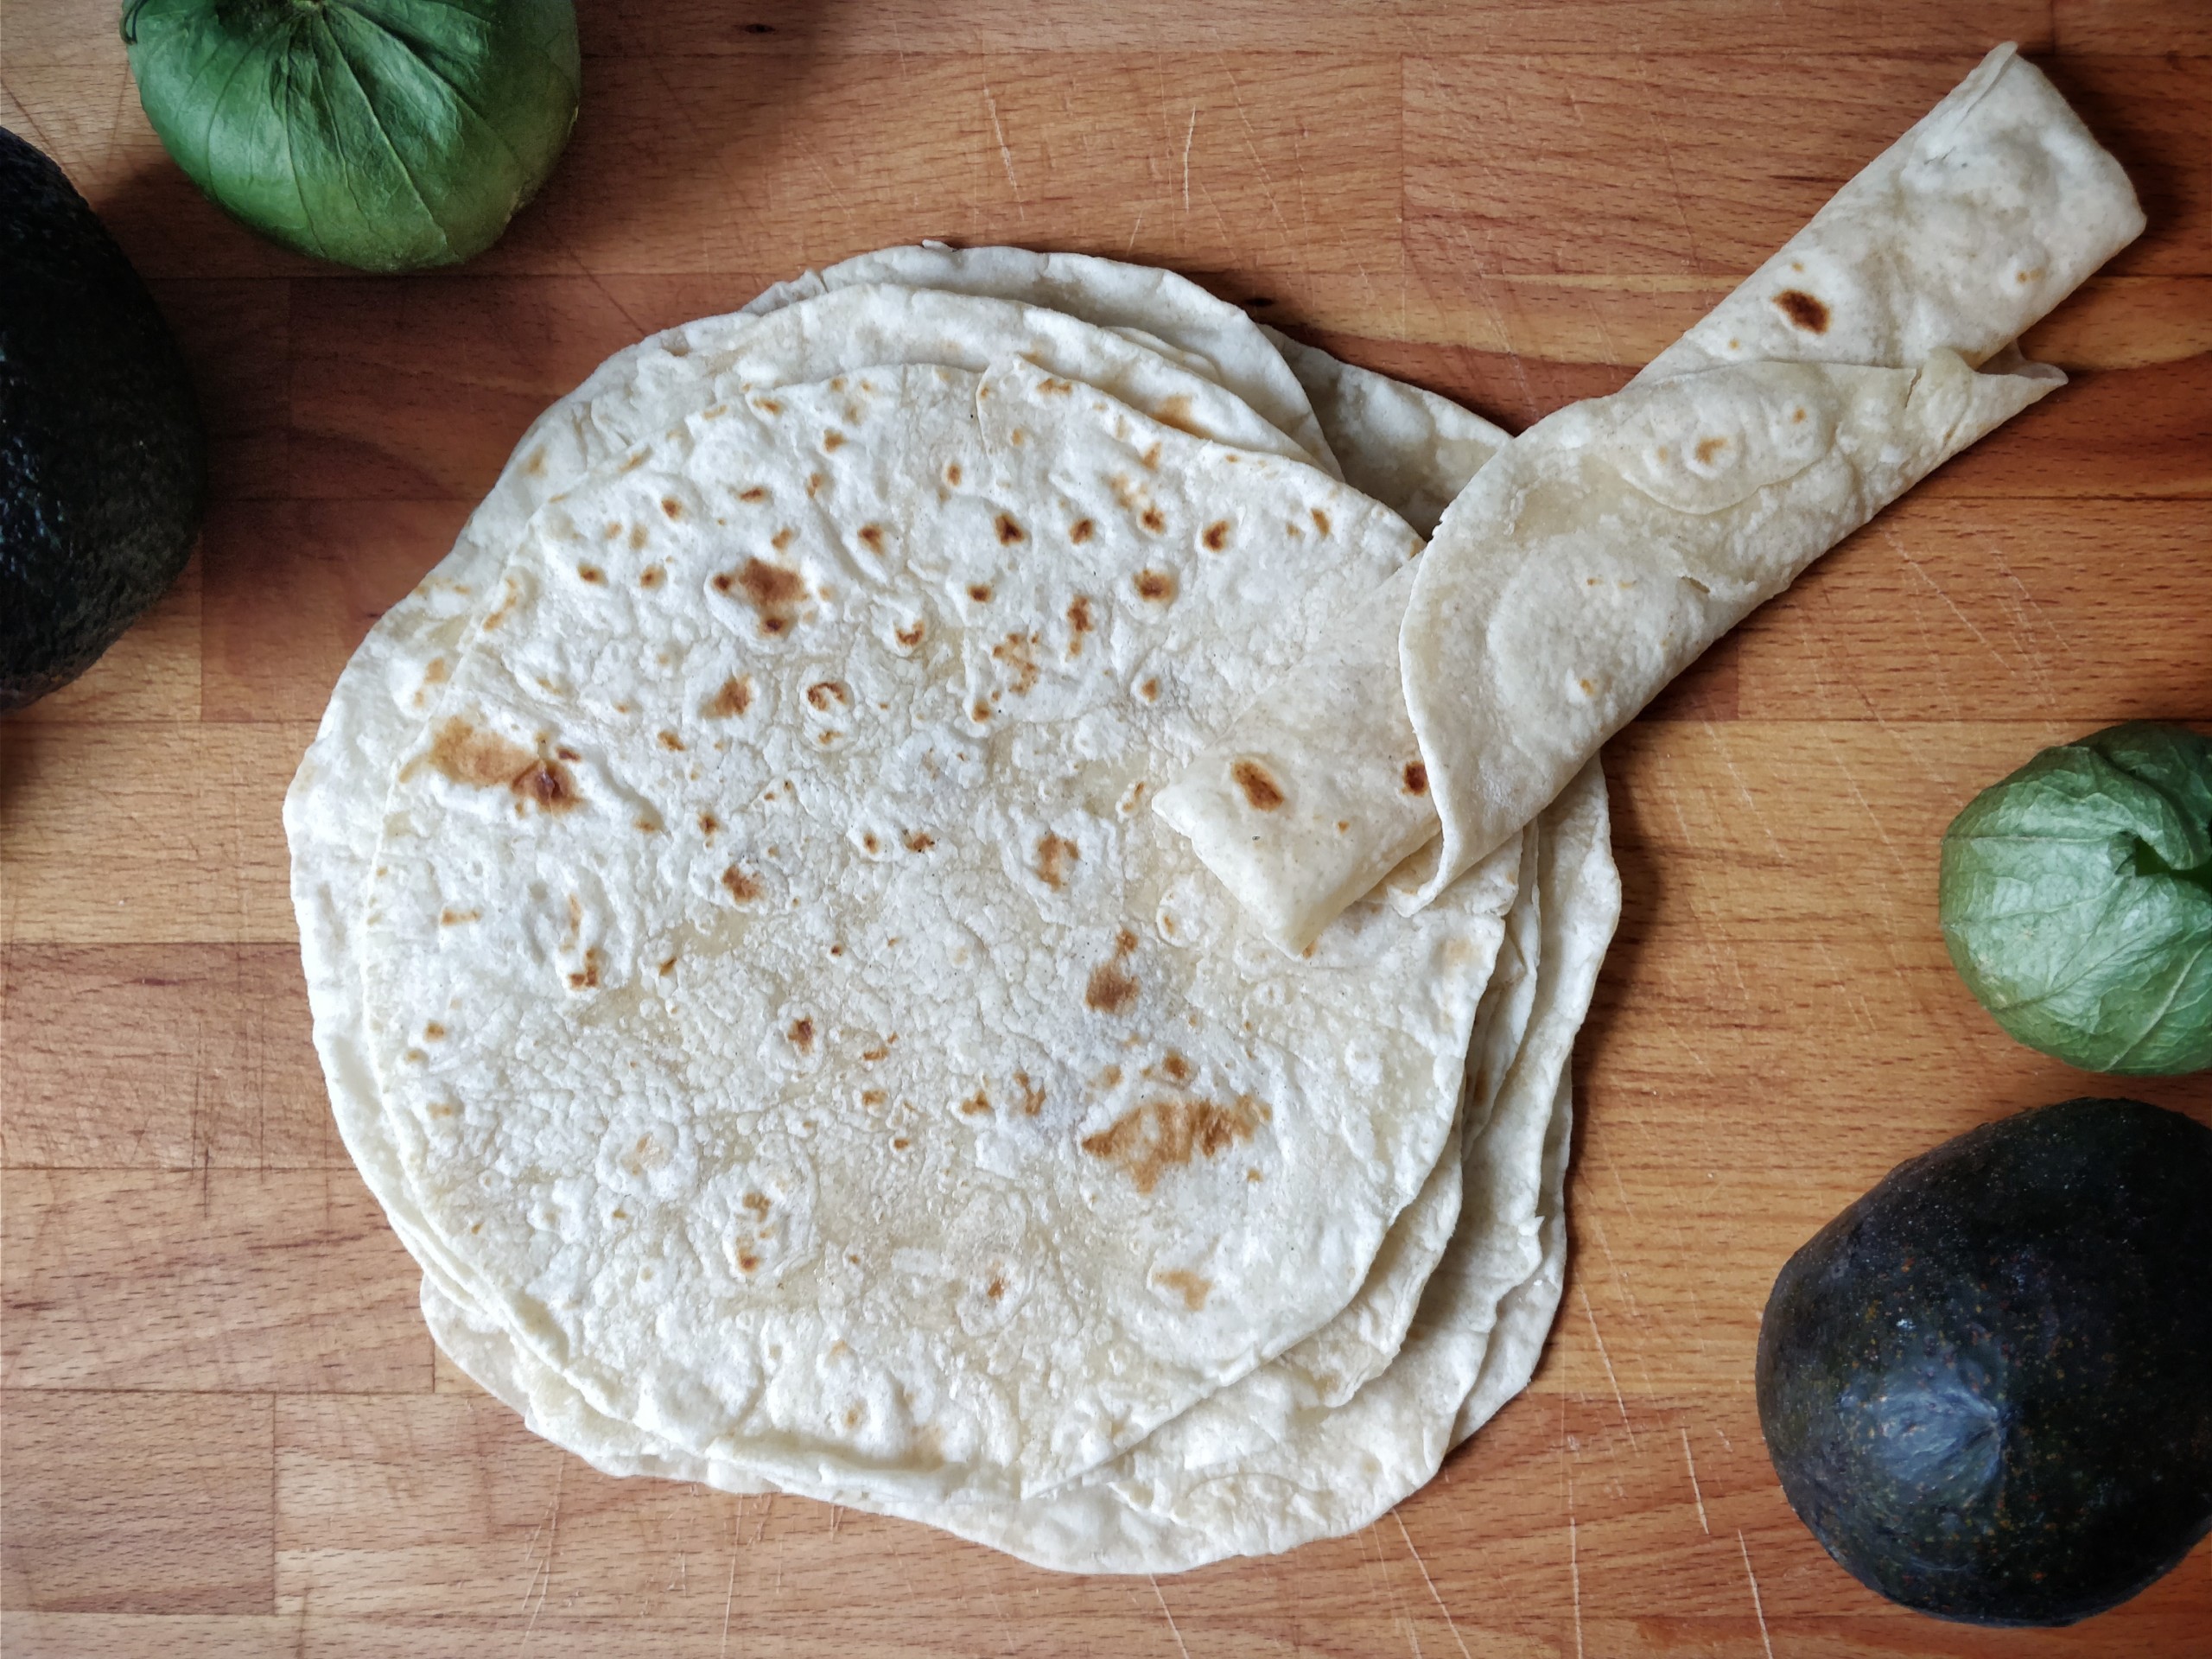 A stack of freshly made tortillas on a wooden board, with some avocados and tomatillos placed around. One tortilla is rolled up to indicate softness.